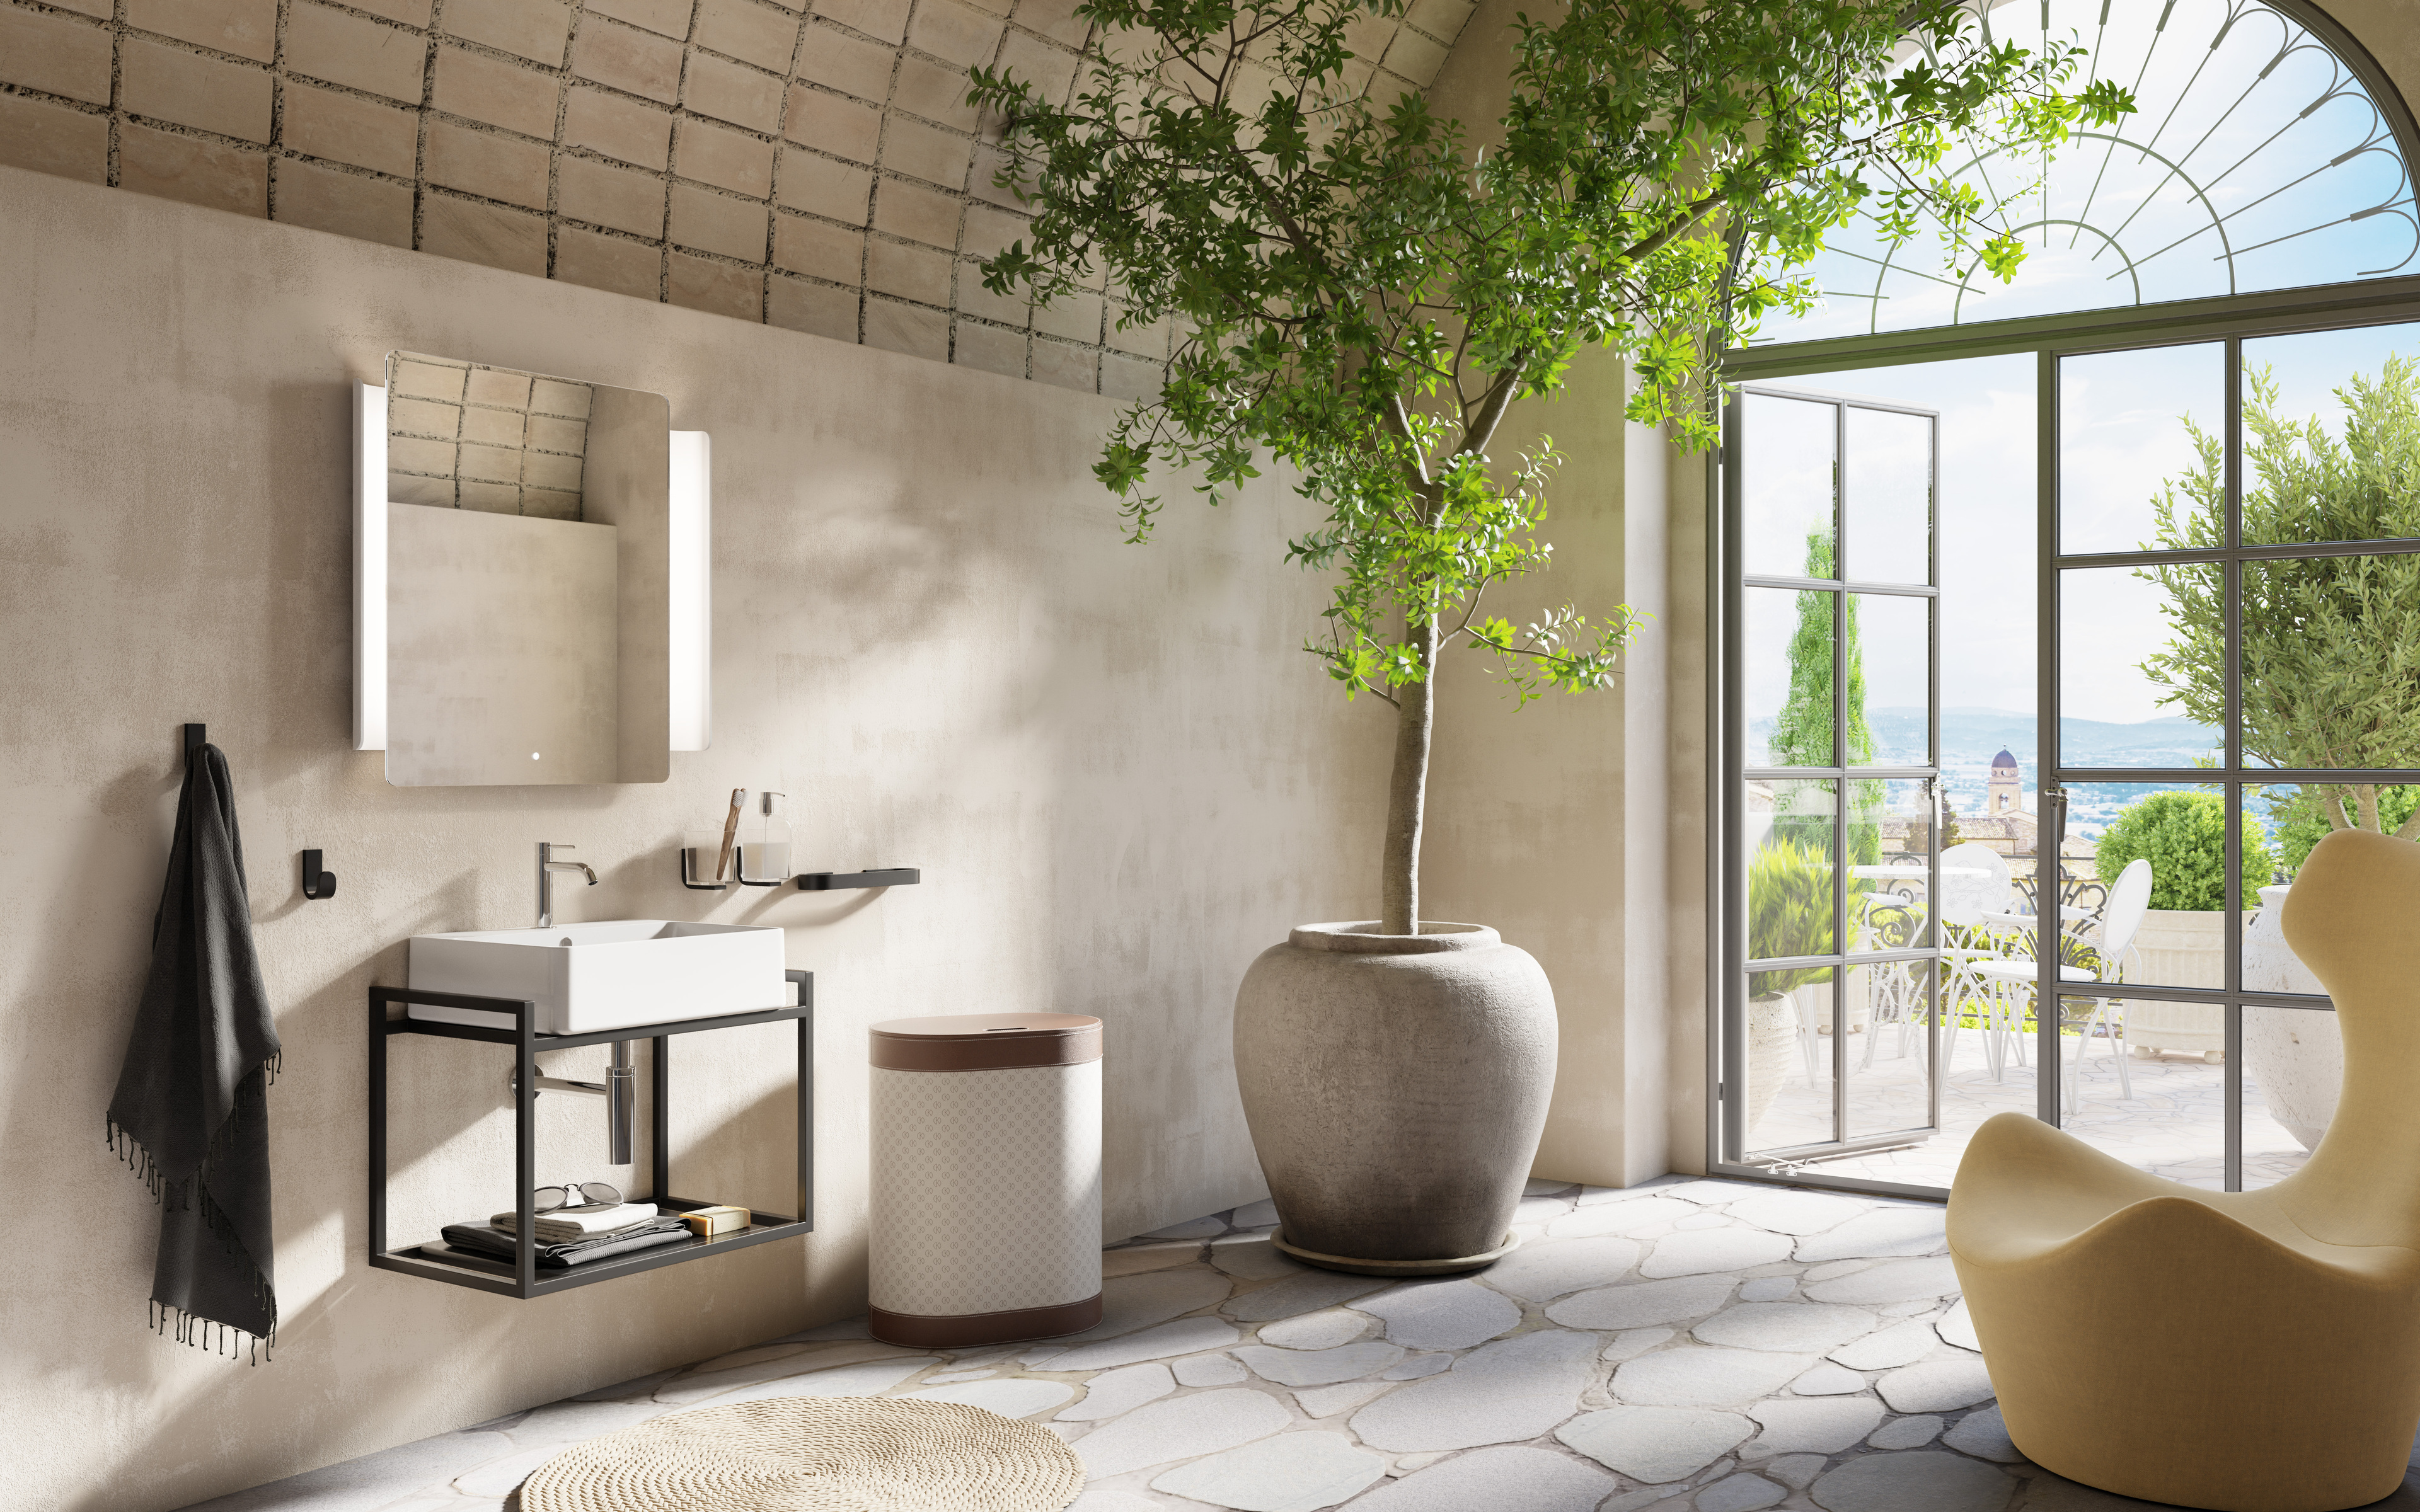 Italian Bathroom Finished Projects Blender Artists Community